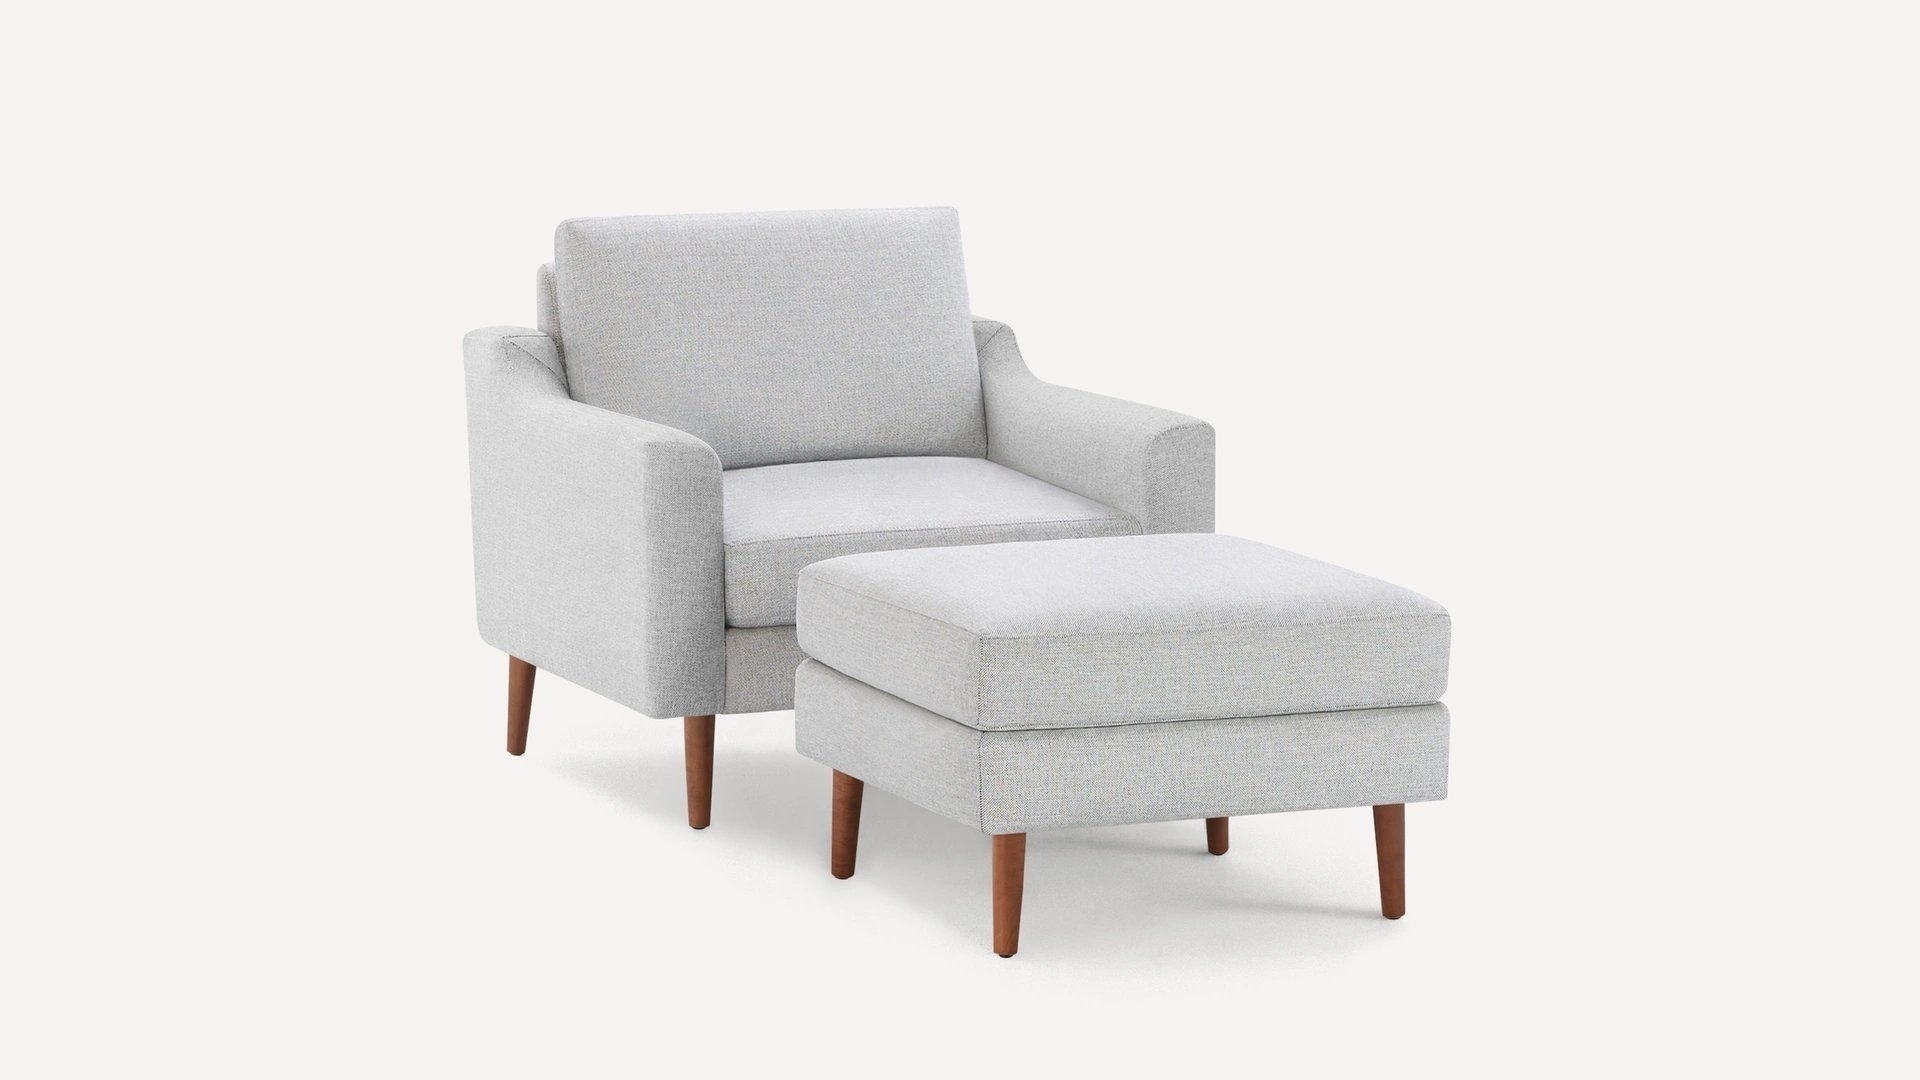 Nomad Armchair and Ottoman in Crushed Gravel, Leg Finish: WalnutLegs - Image 1